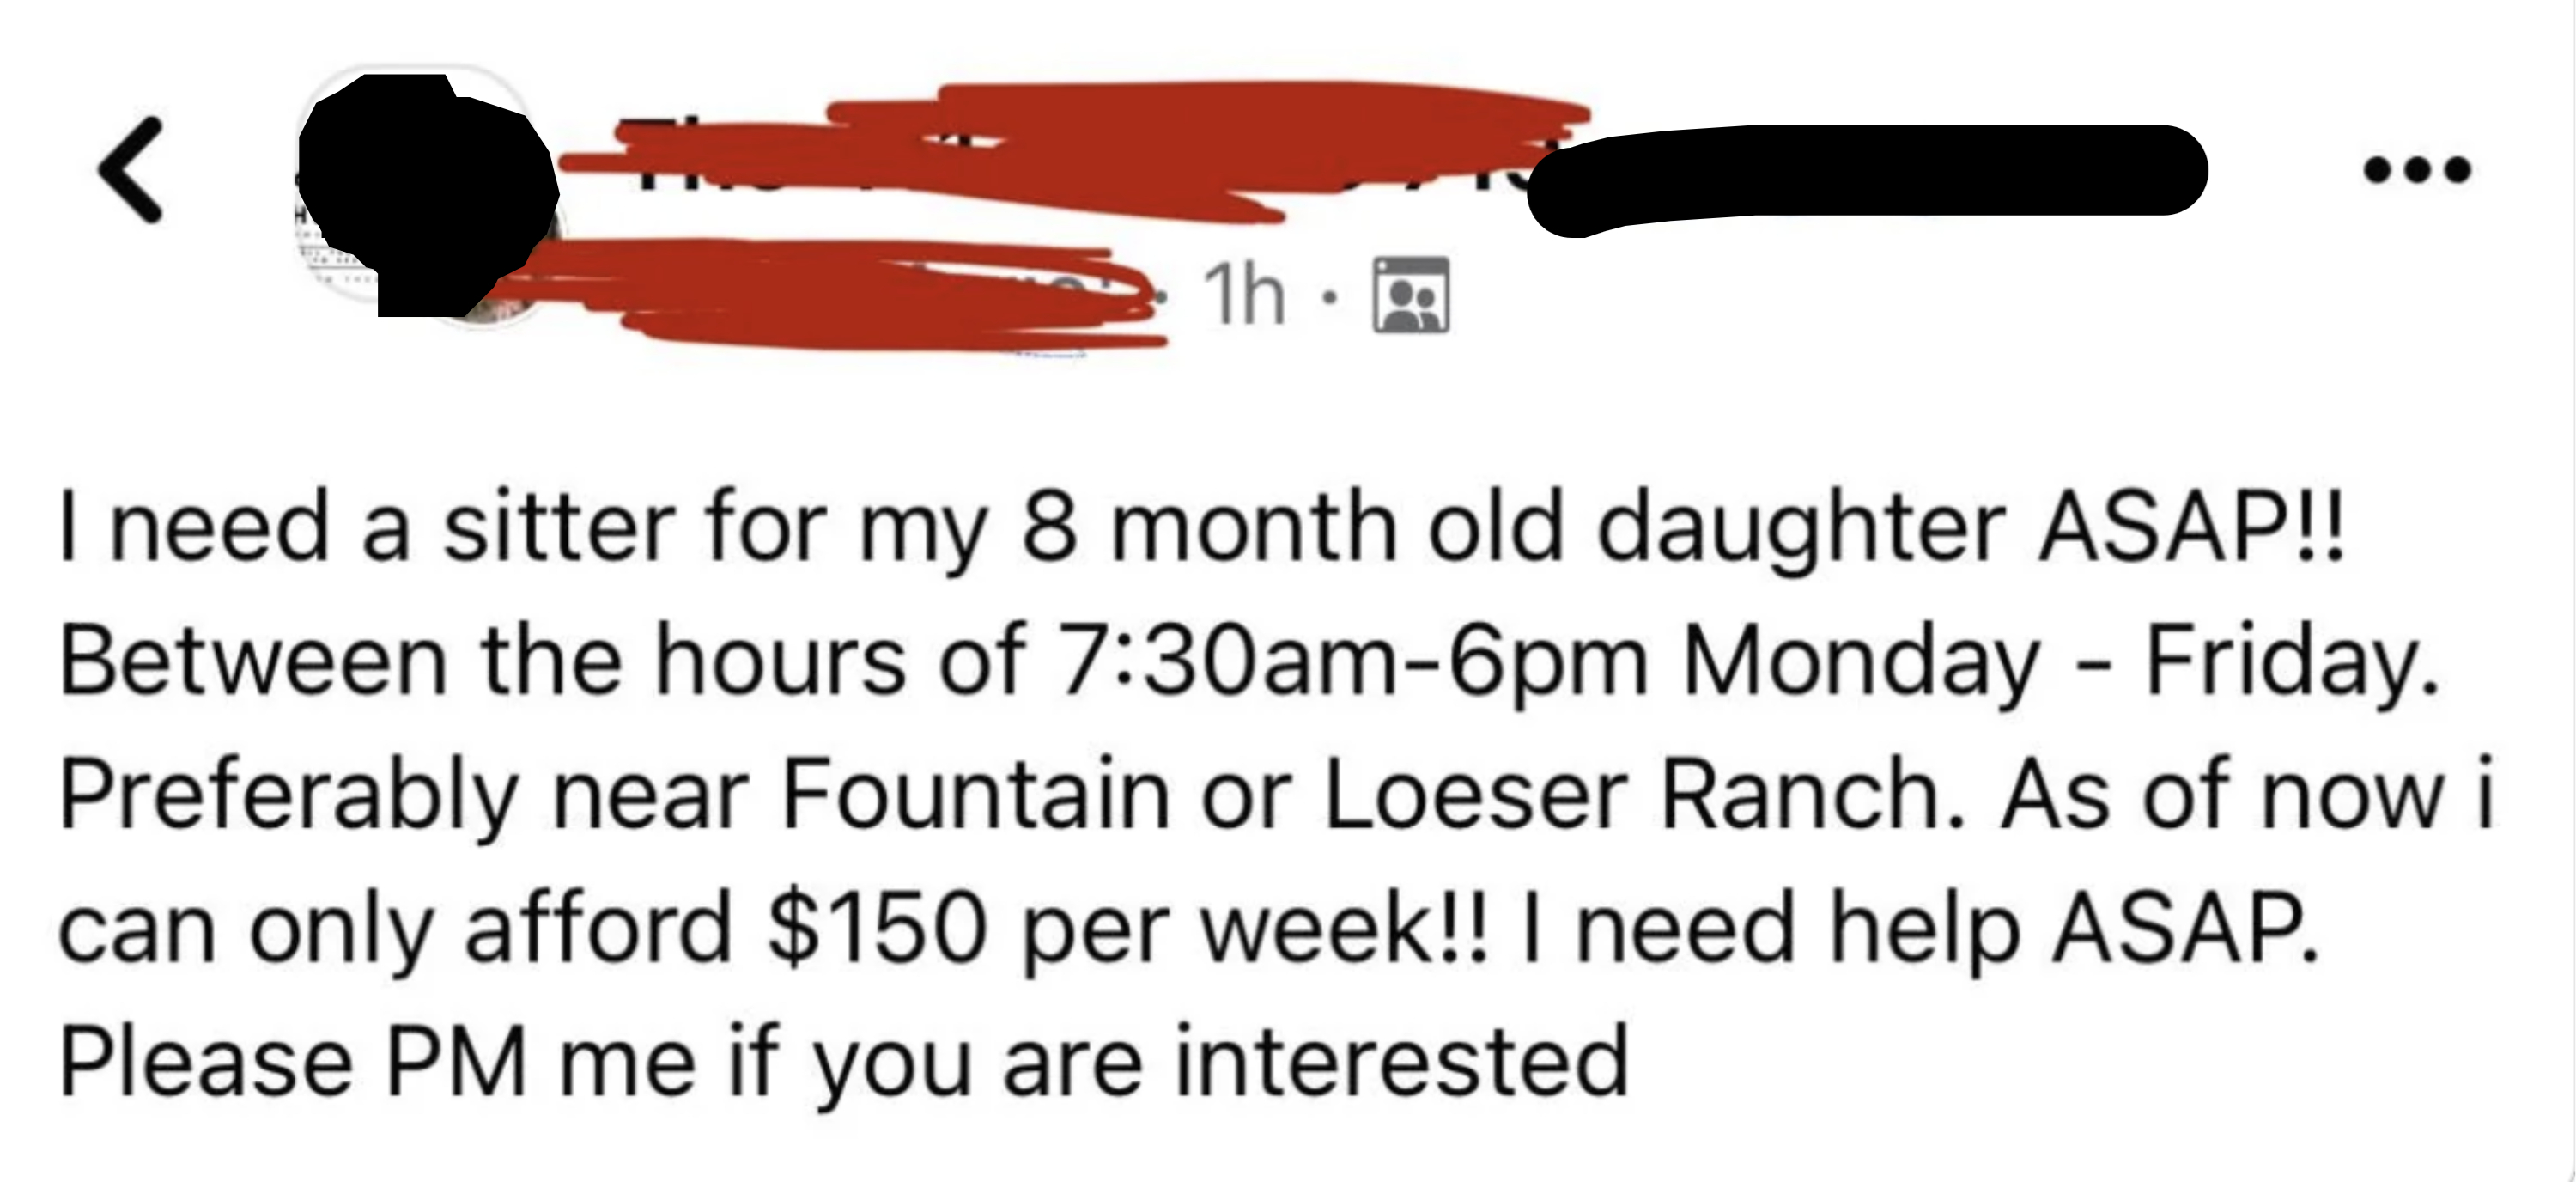 Parent&#x27;s online post seeking an urgent babysitter for their daughter, offering $150 per week, and requesting private messages from interested parties